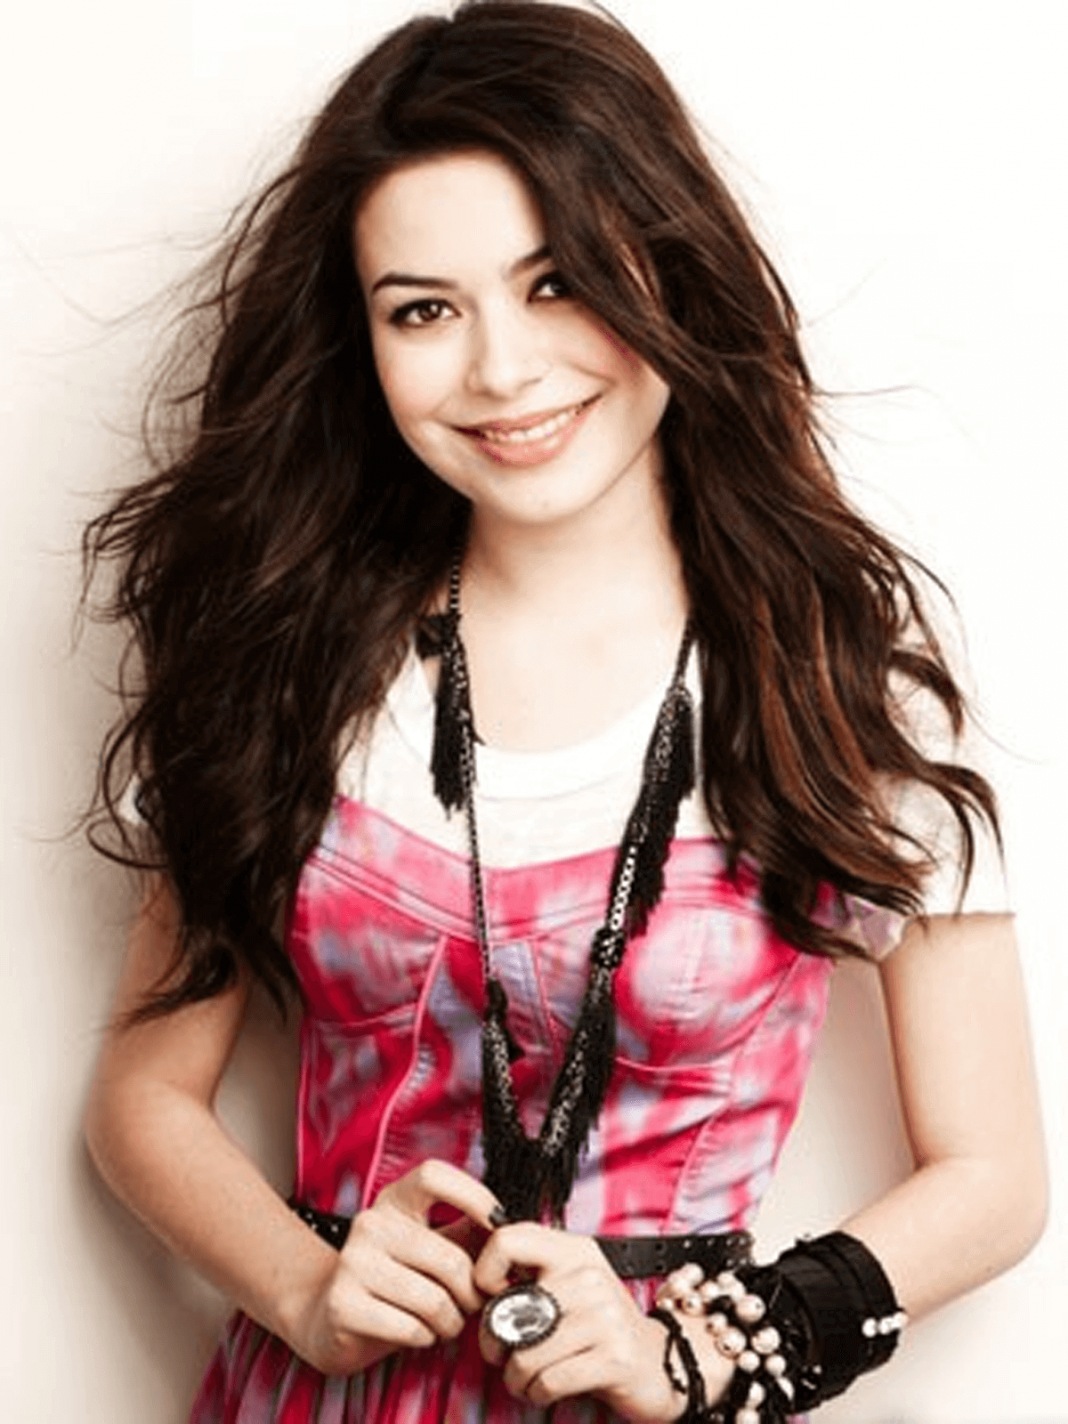 49 Miranda Cosgrove Nude Pictures Which Are Sure To Keep You Charmed With Her Charisma 38